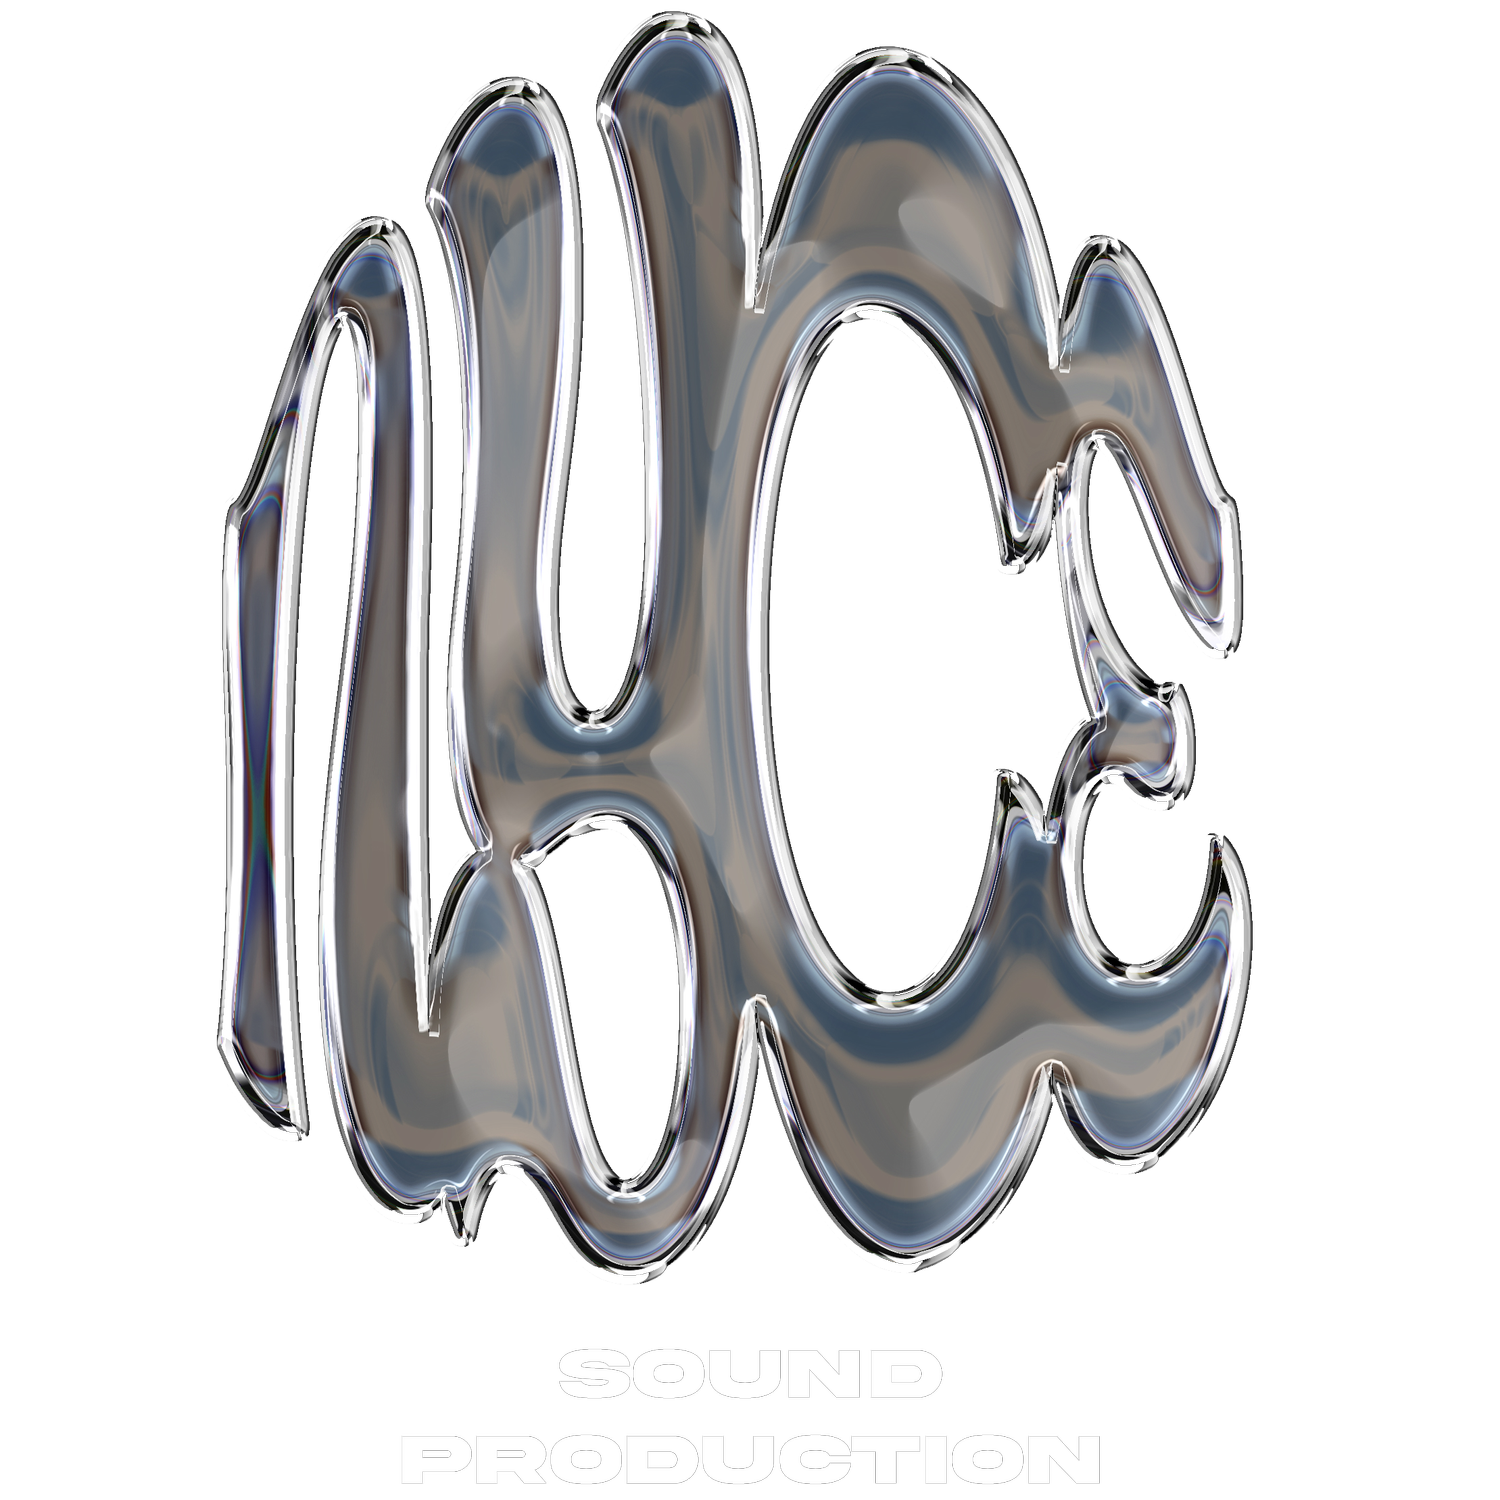 NYCESOUND PRODUCTION